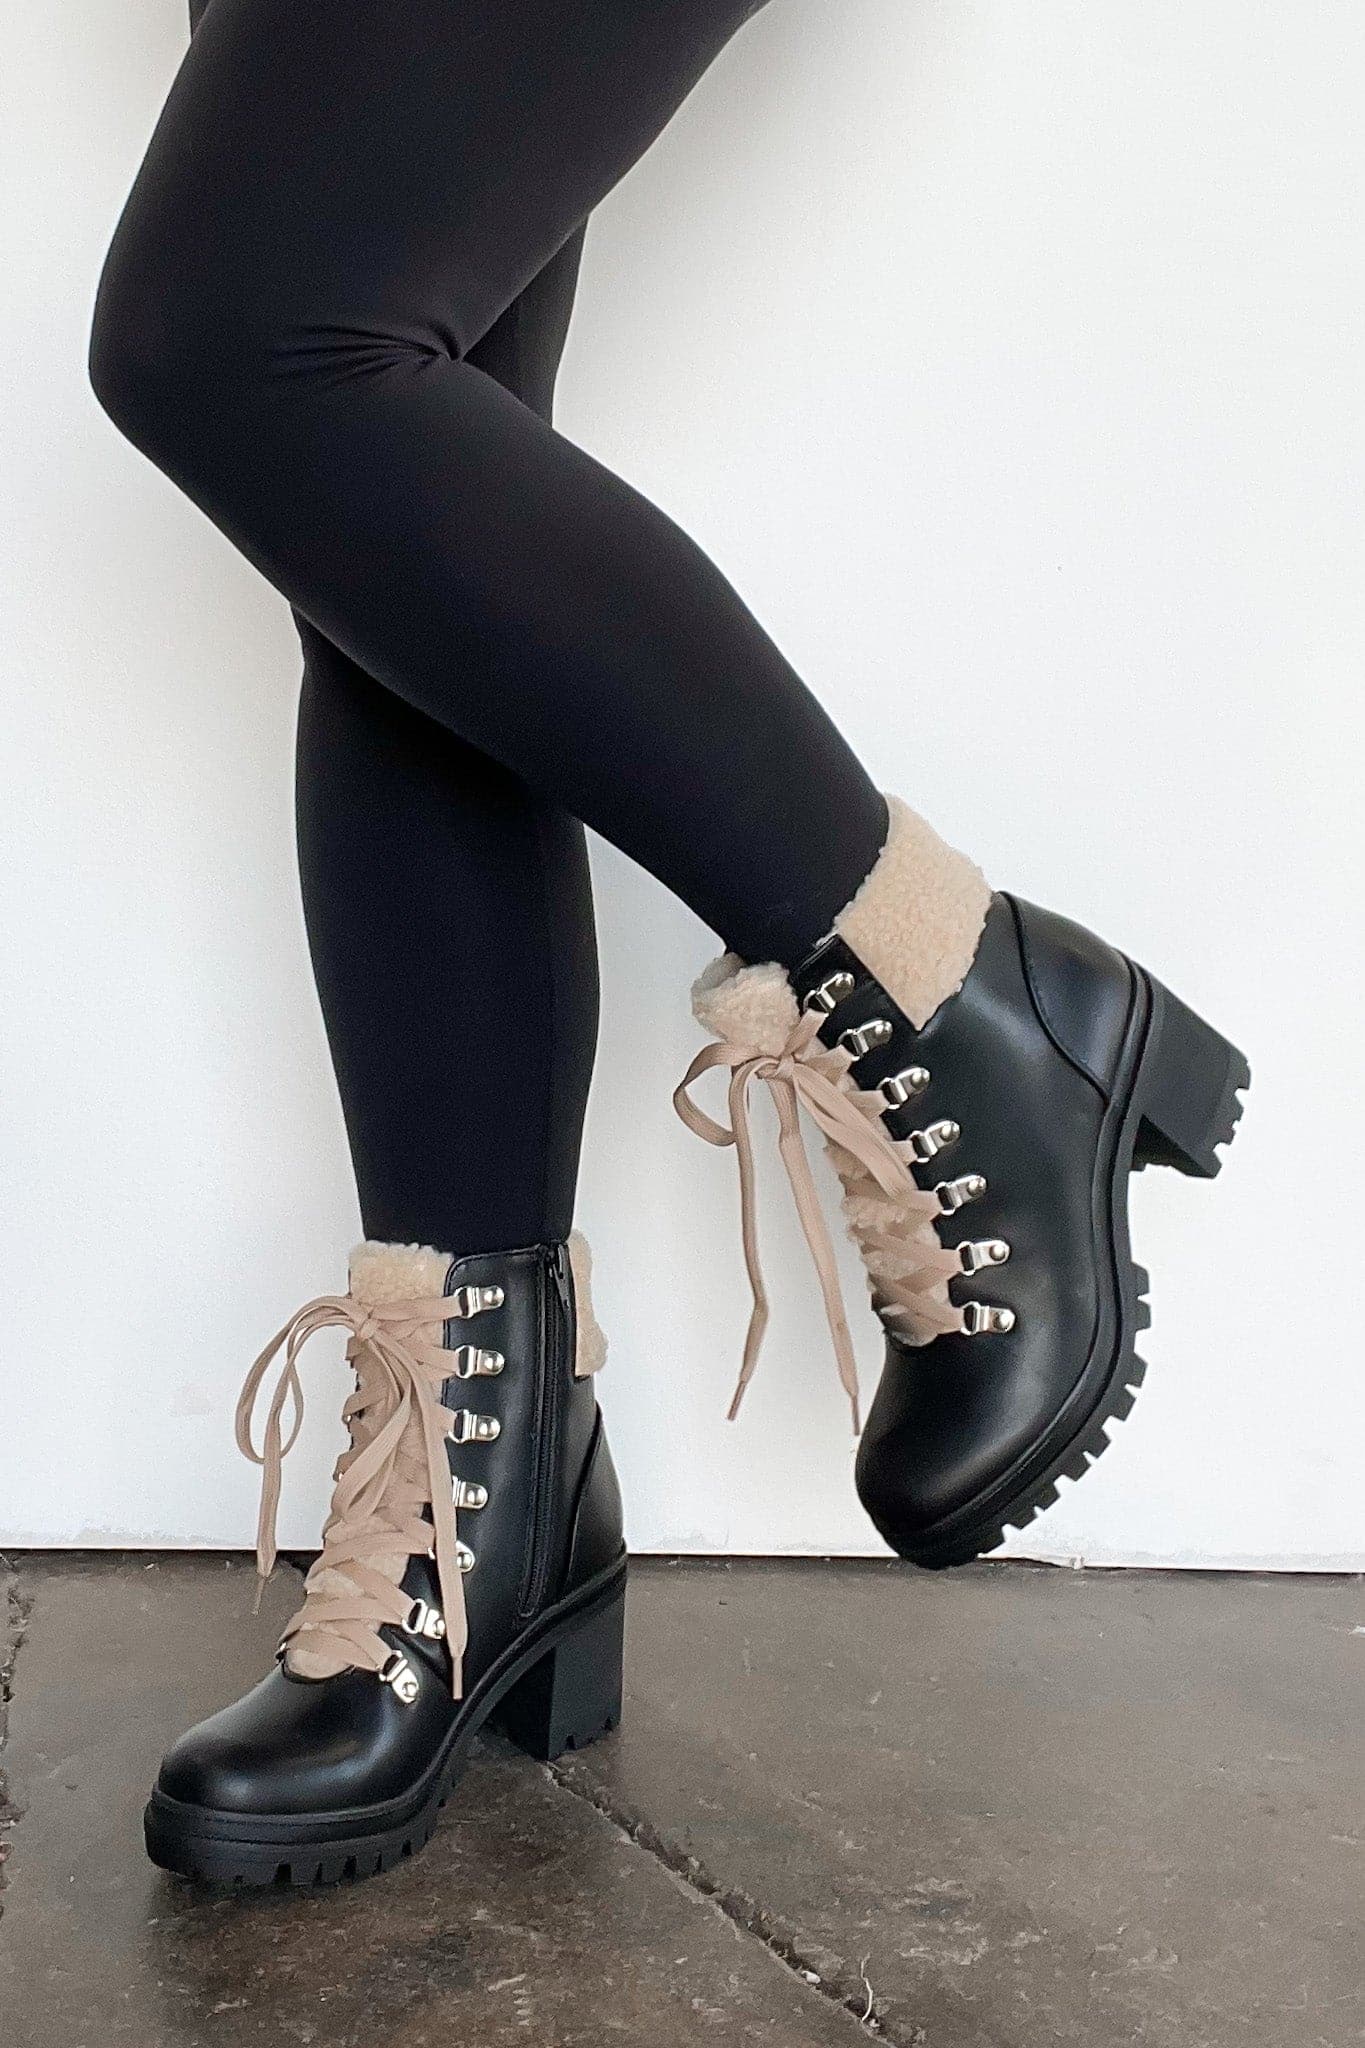  In Step Sherpa Heeled Boots - Madison and Mallory